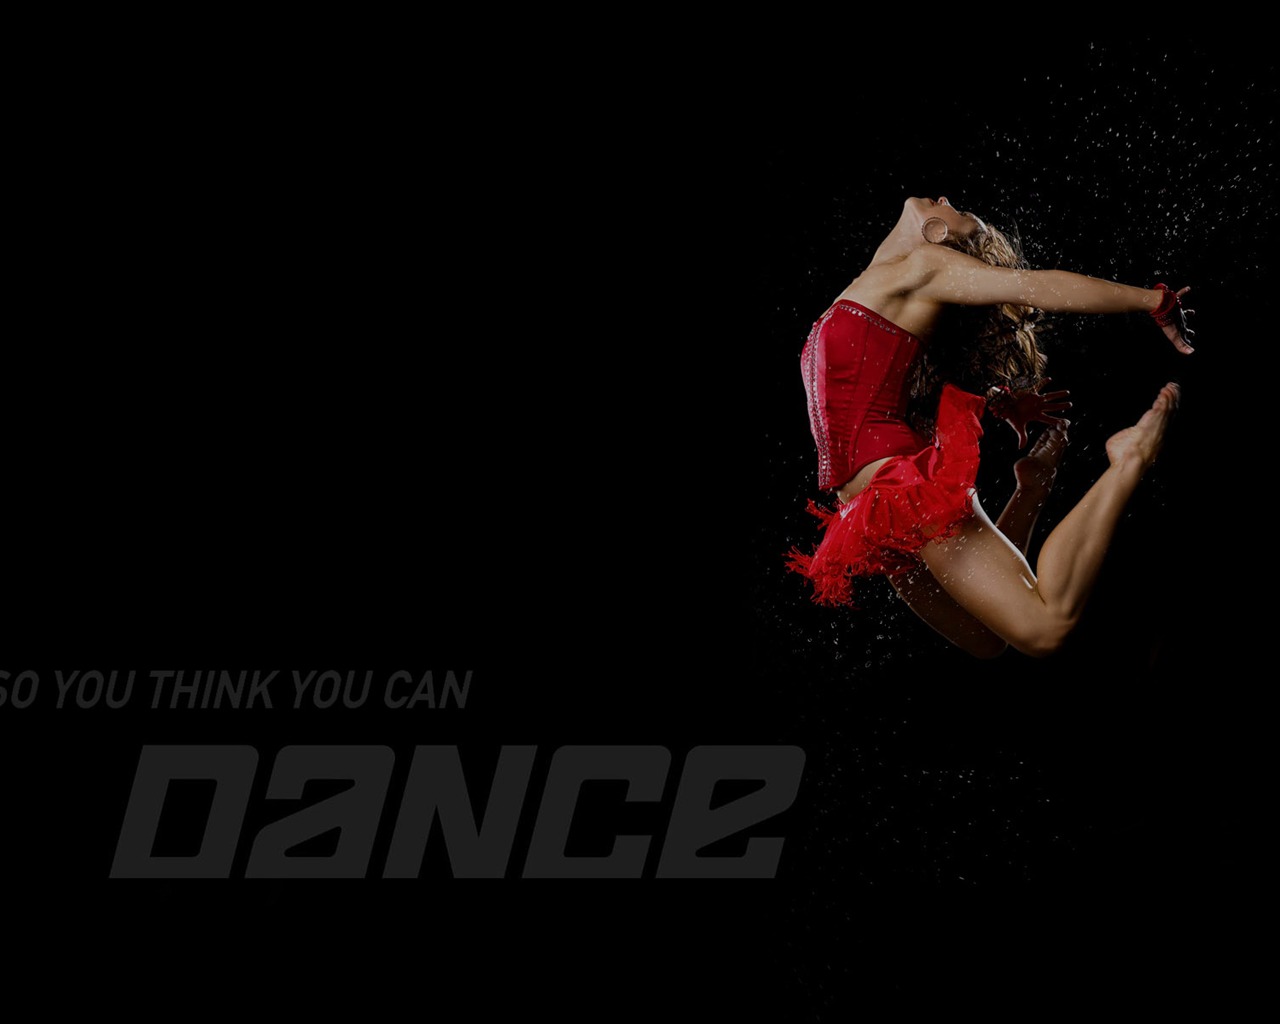 So You Think You Can Dance 舞林争霸 壁纸(二)1 - 1280x1024